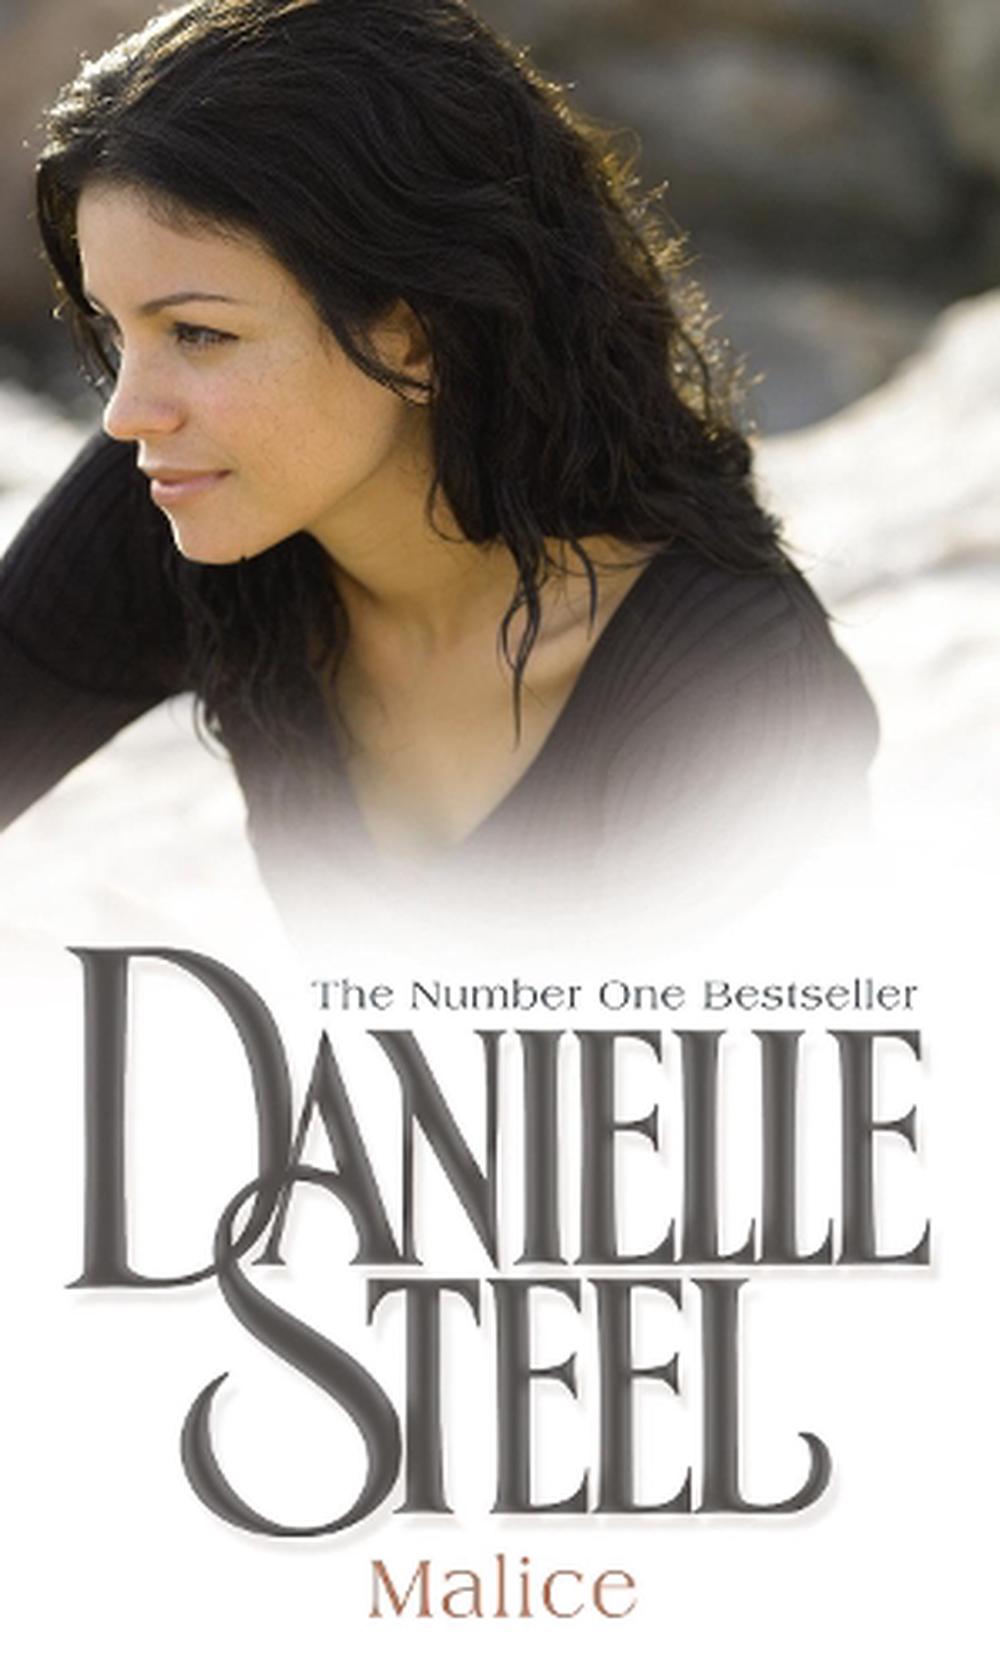 Malice by Danielle Steel, Paperback, 9780552141314 Buy online at The Nile